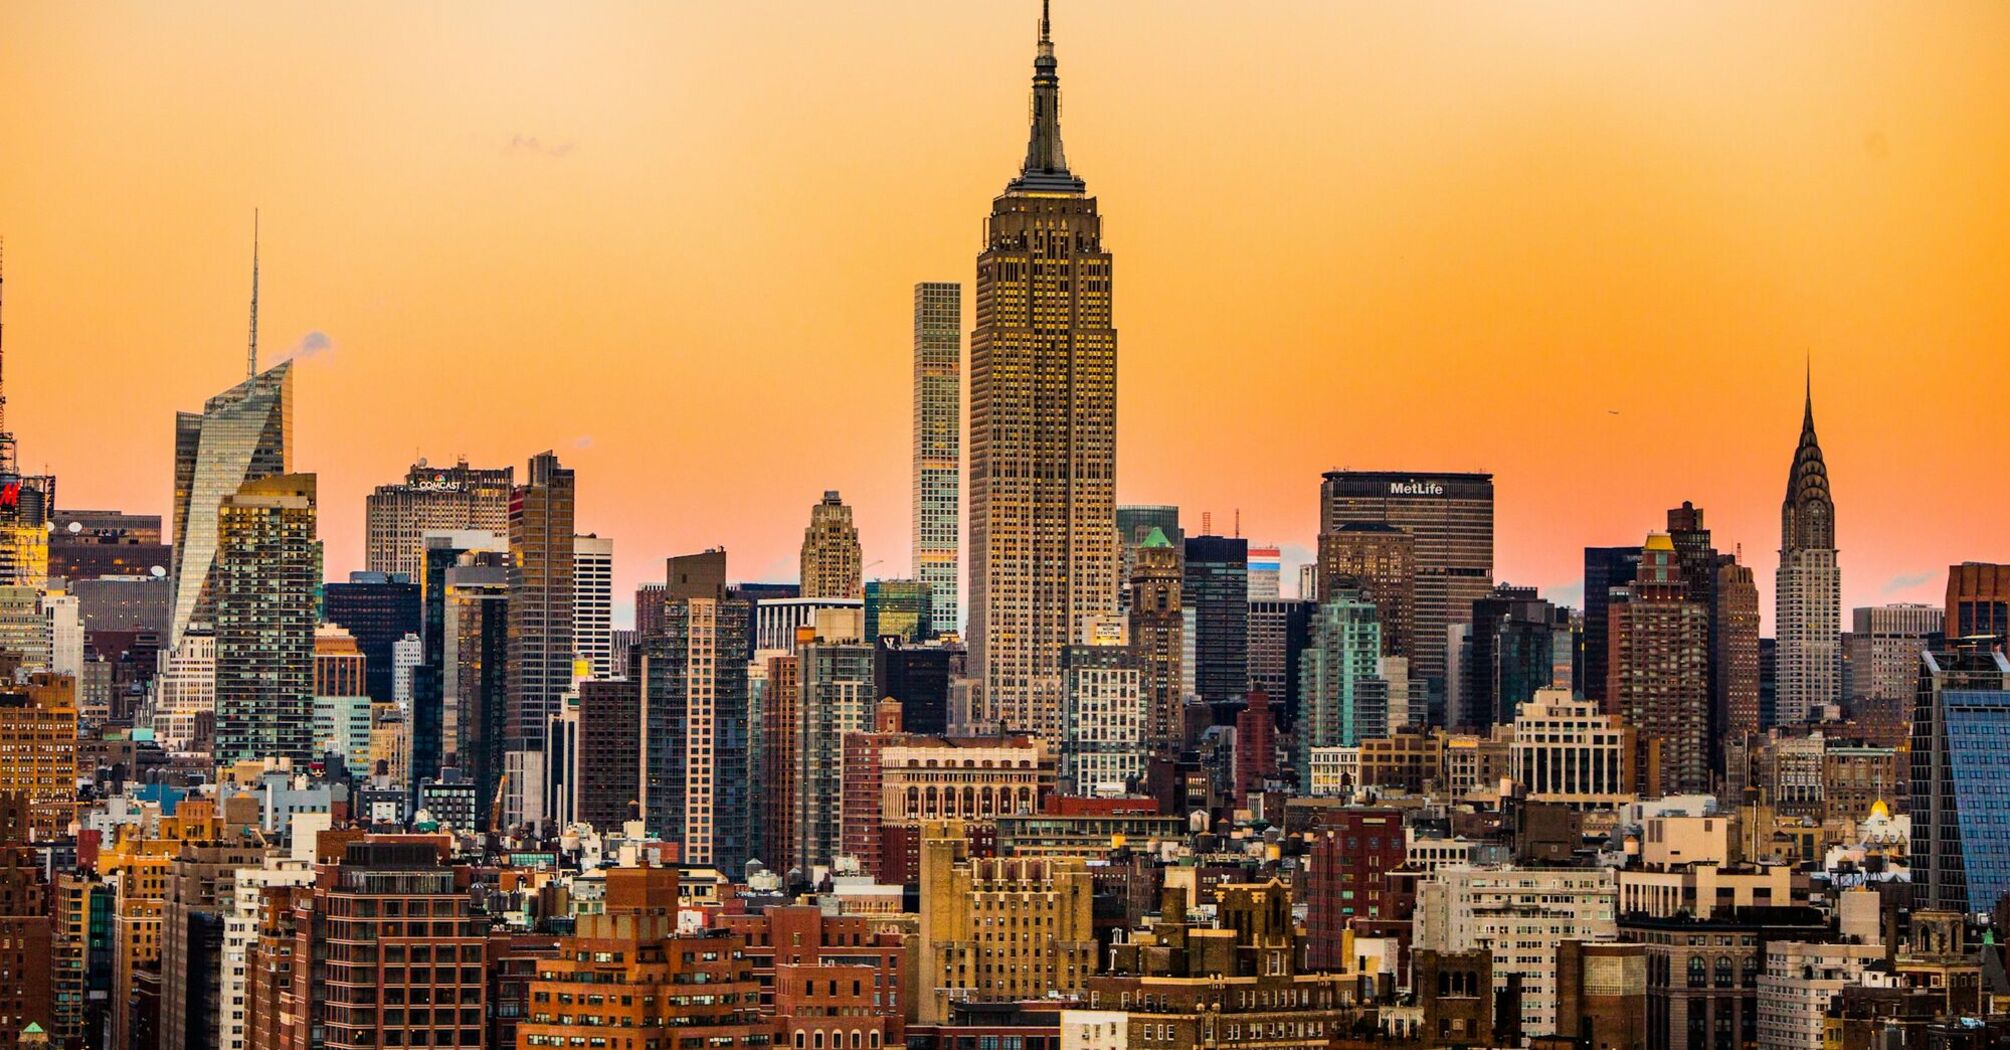 Skyline of New York City during sunset with prominent buildings including the Empire State Building